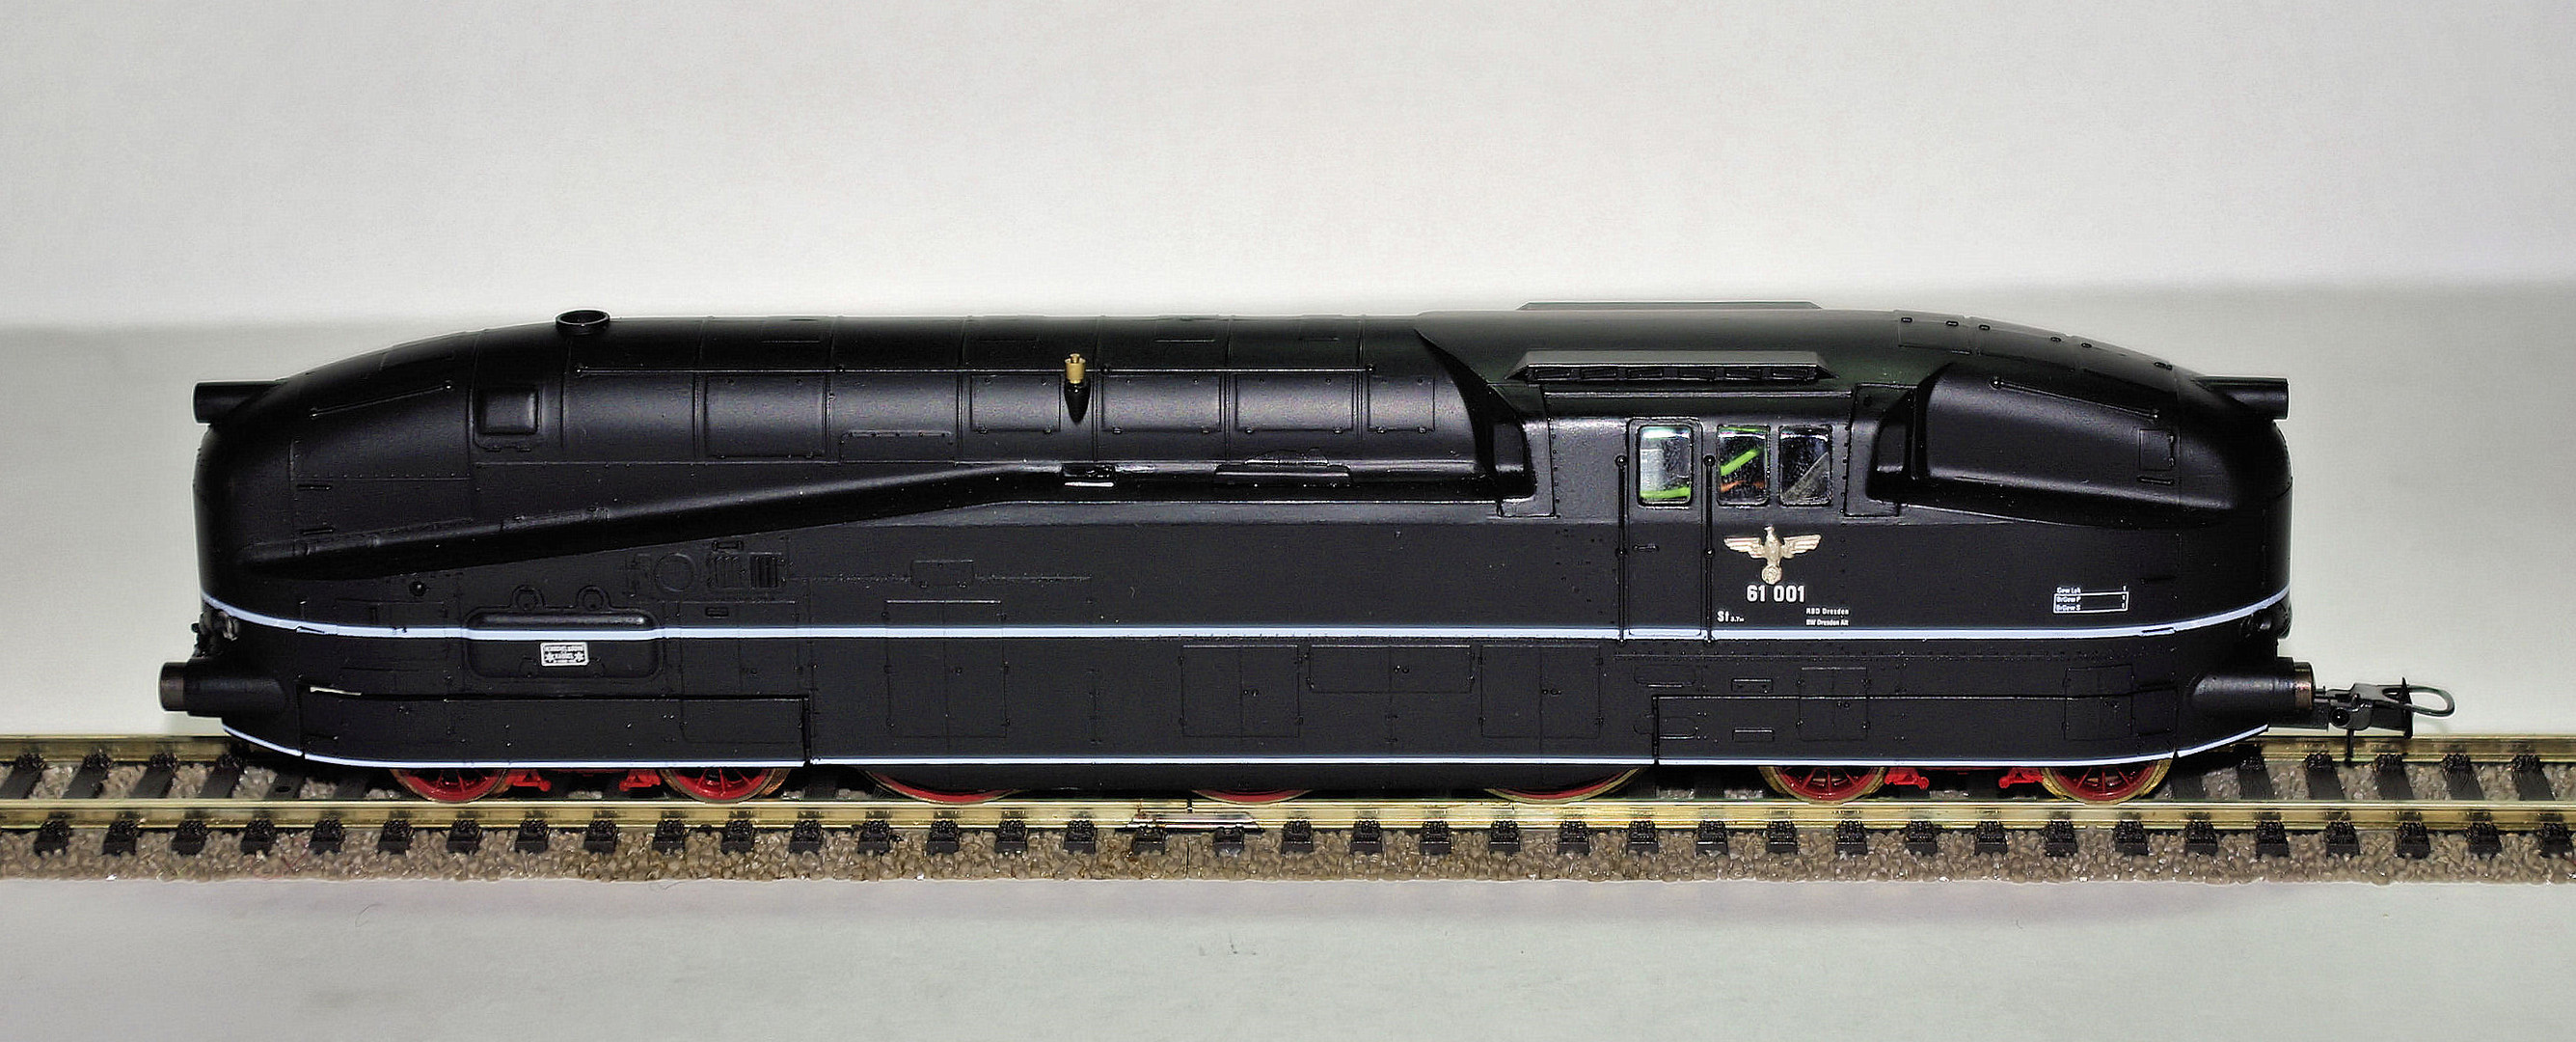 BR 61 001